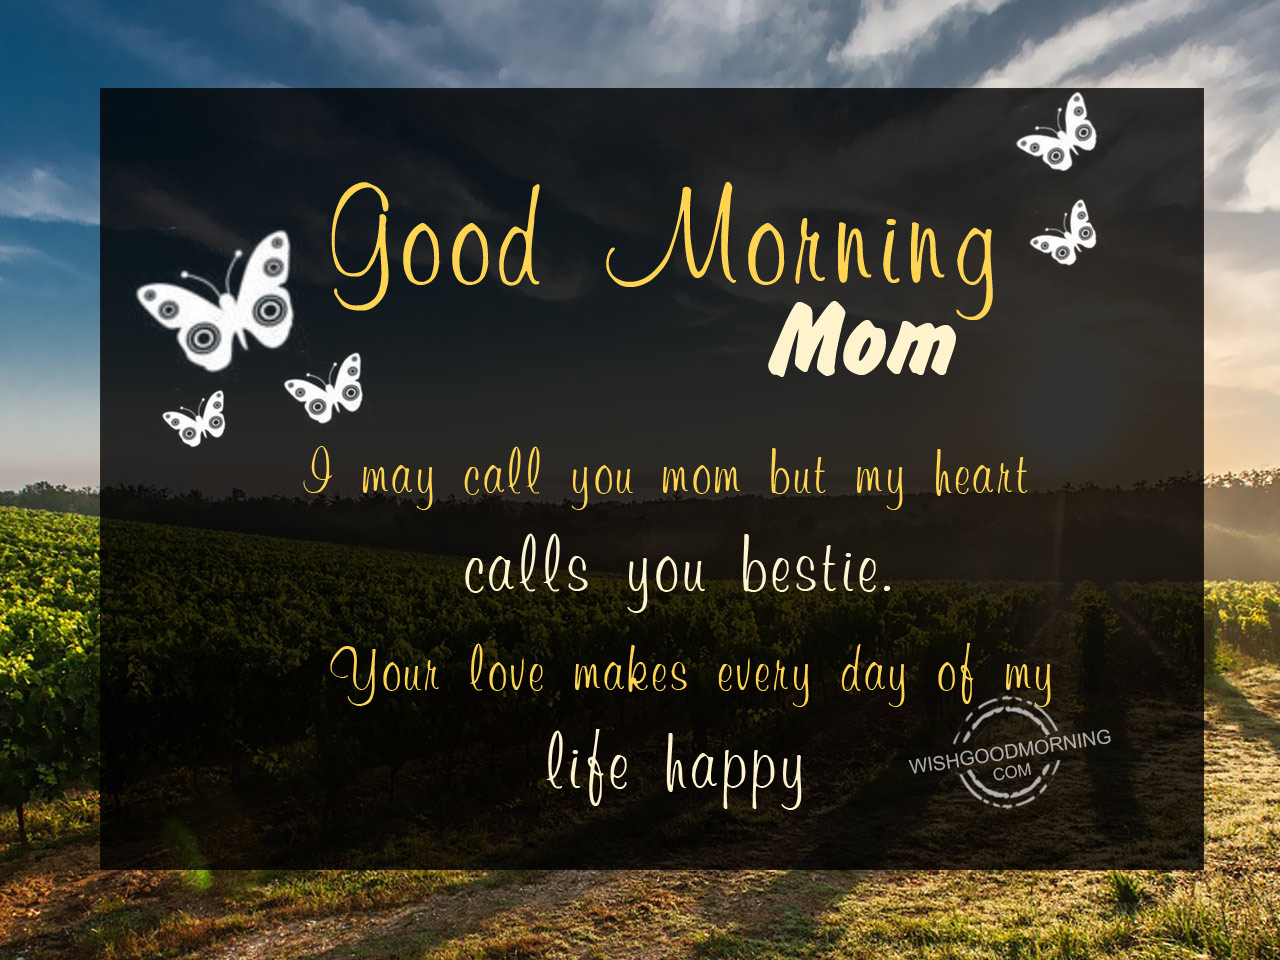 a href="https://www.wishgoodmorning.com/good-morning-wishes-for-mother/i-may-call-you...